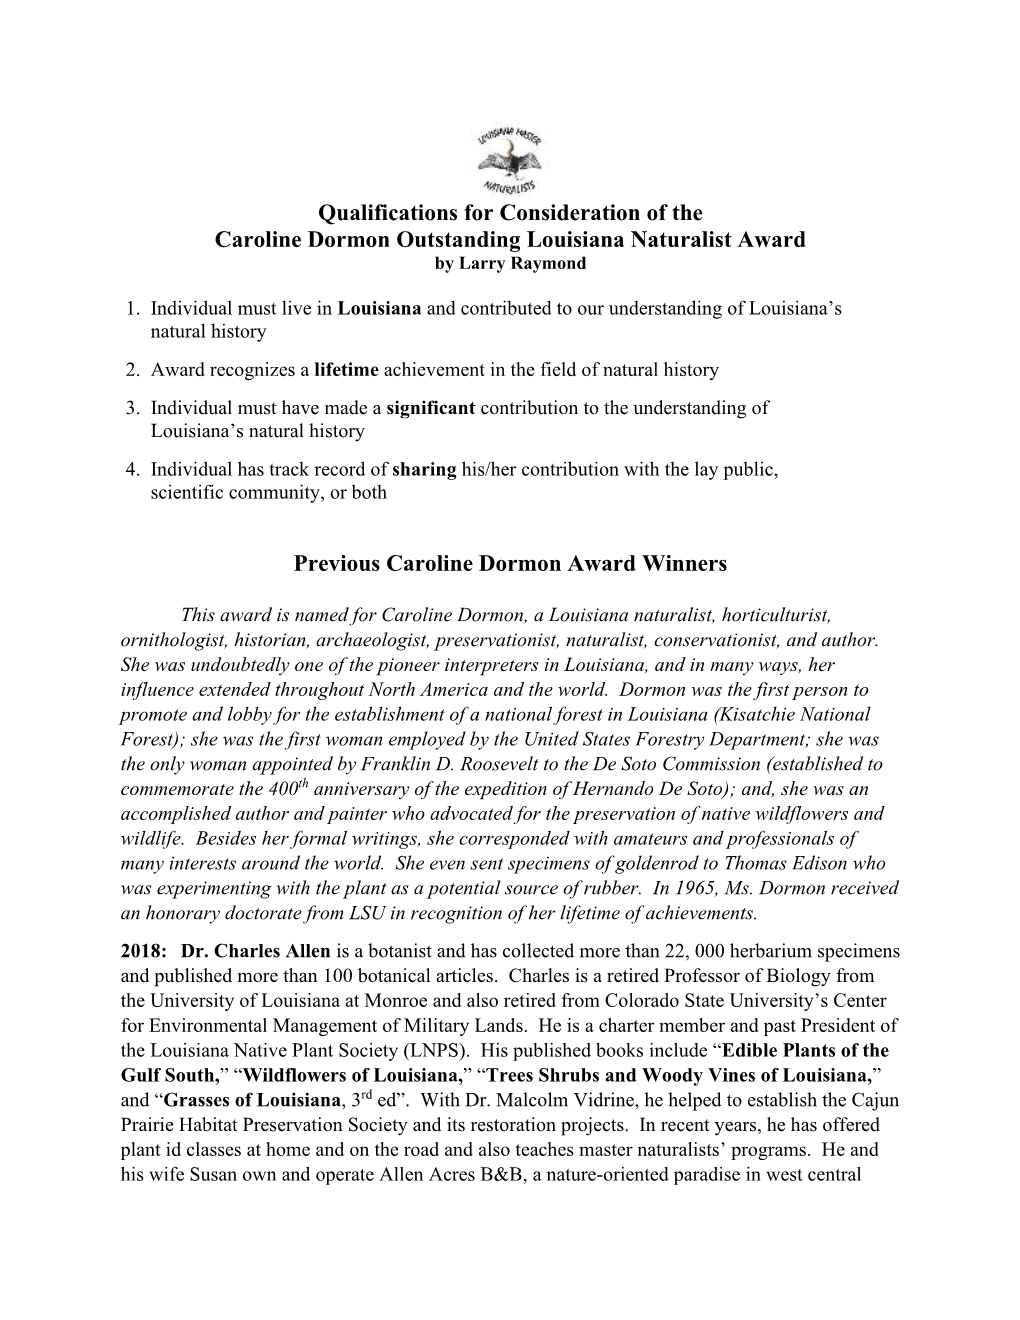 Qualifications for Consideration of the Caroline Dormon Outstanding Louisiana Naturalist Award by Larry Raymond